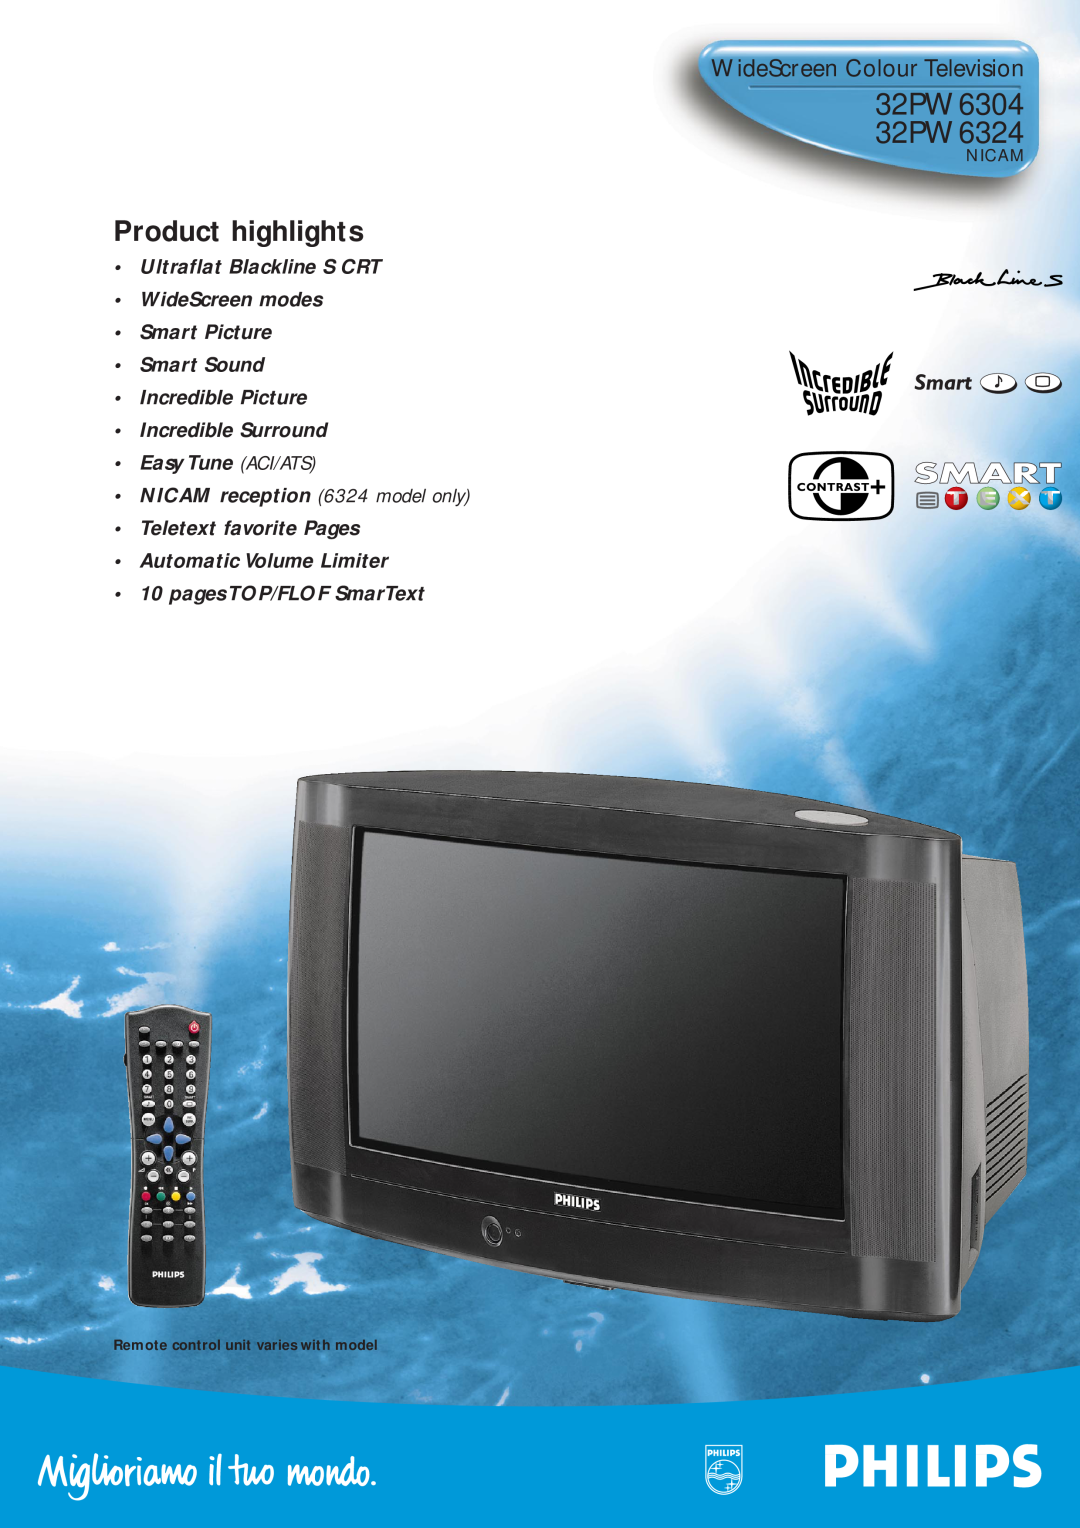 Philips manual 32PW6304 32PW6324, Product highlights, WideScreen Colour Television, Nicam 